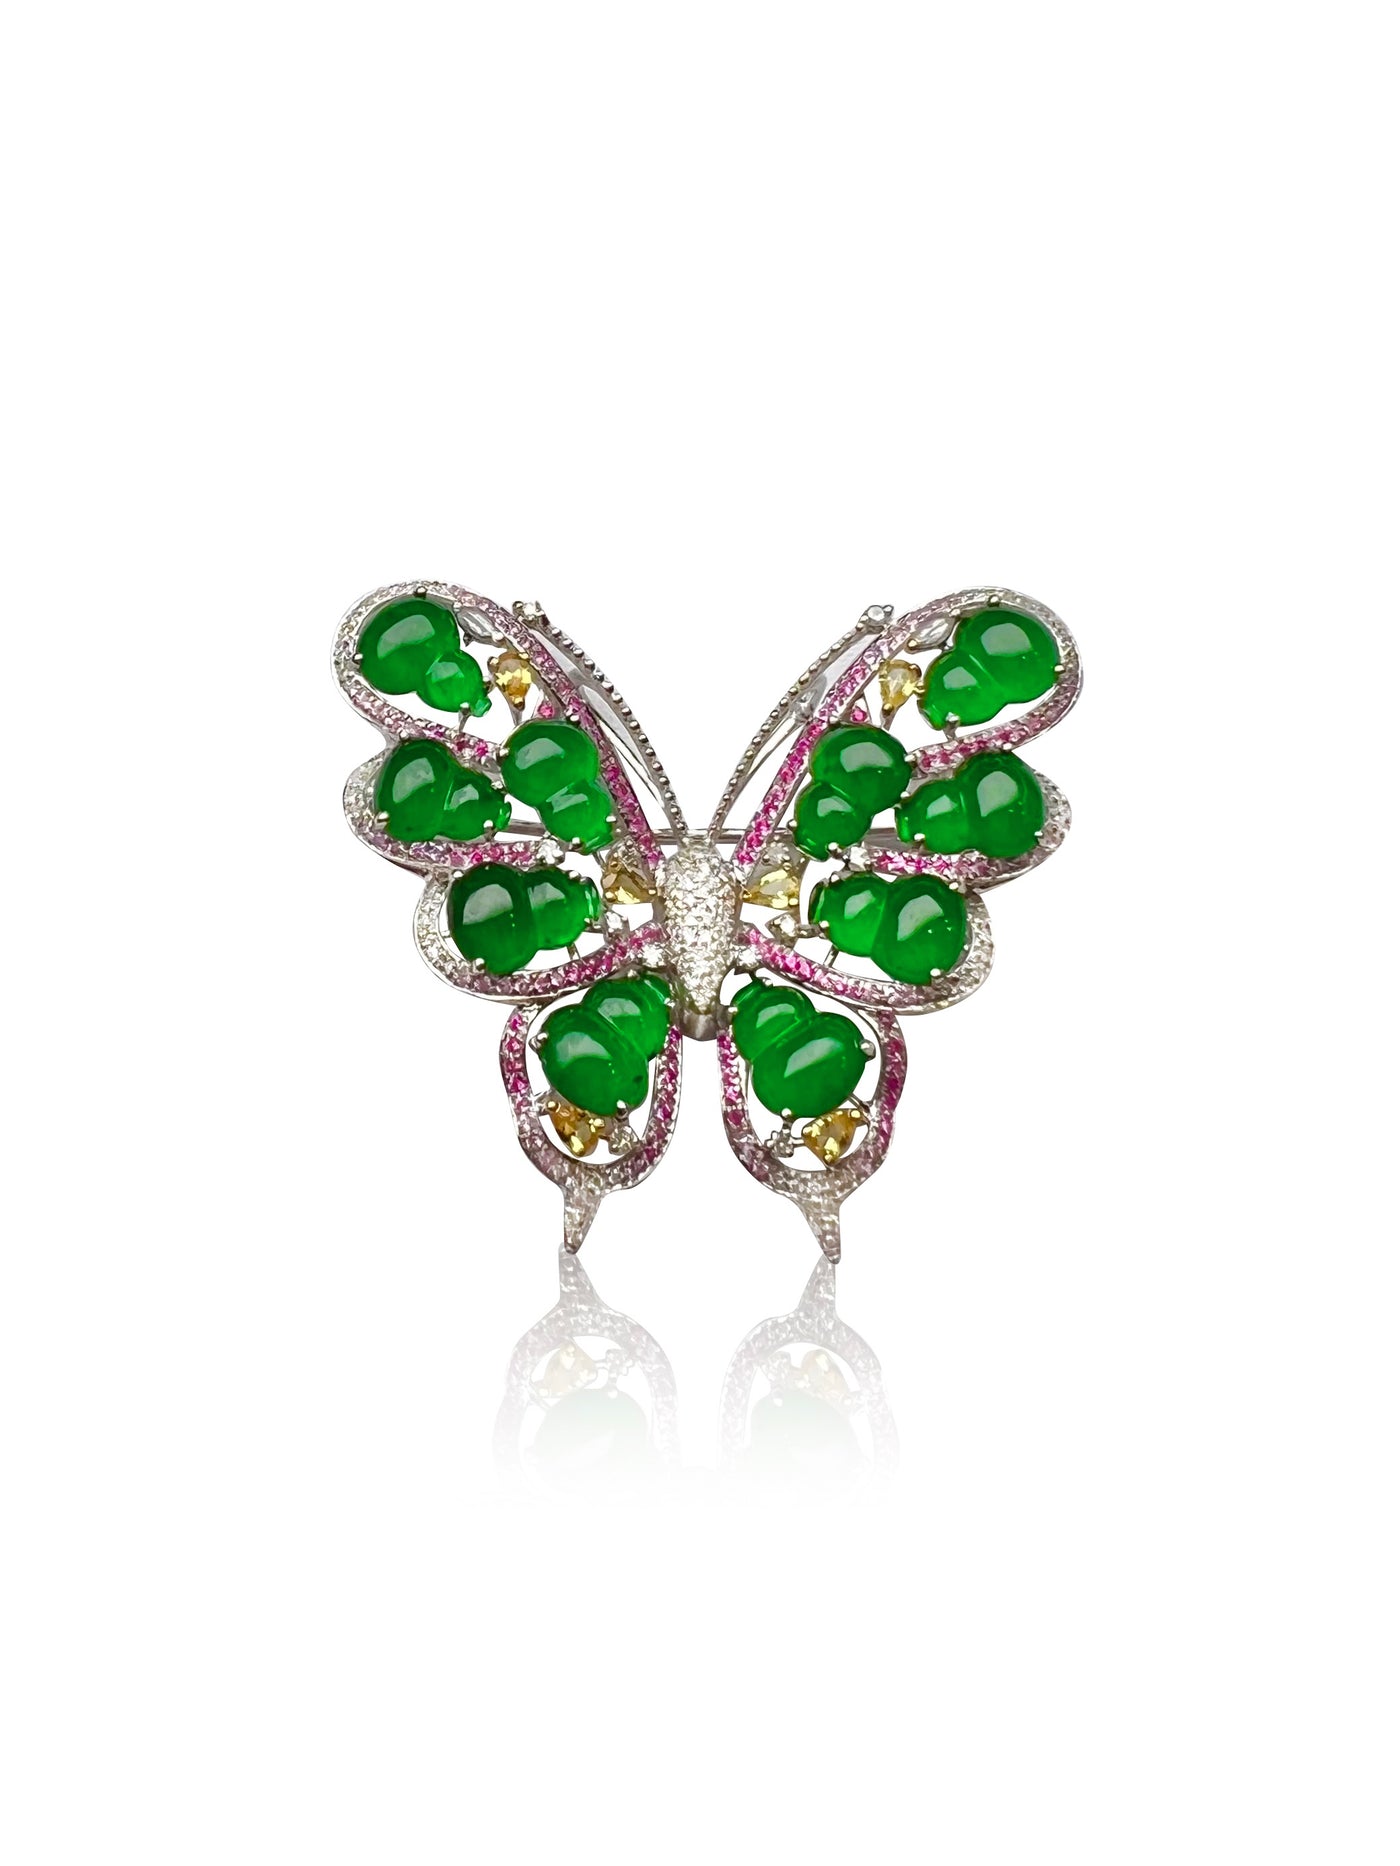 Hulu with butterfly jadeite brooch in 18K white gold with diamonds